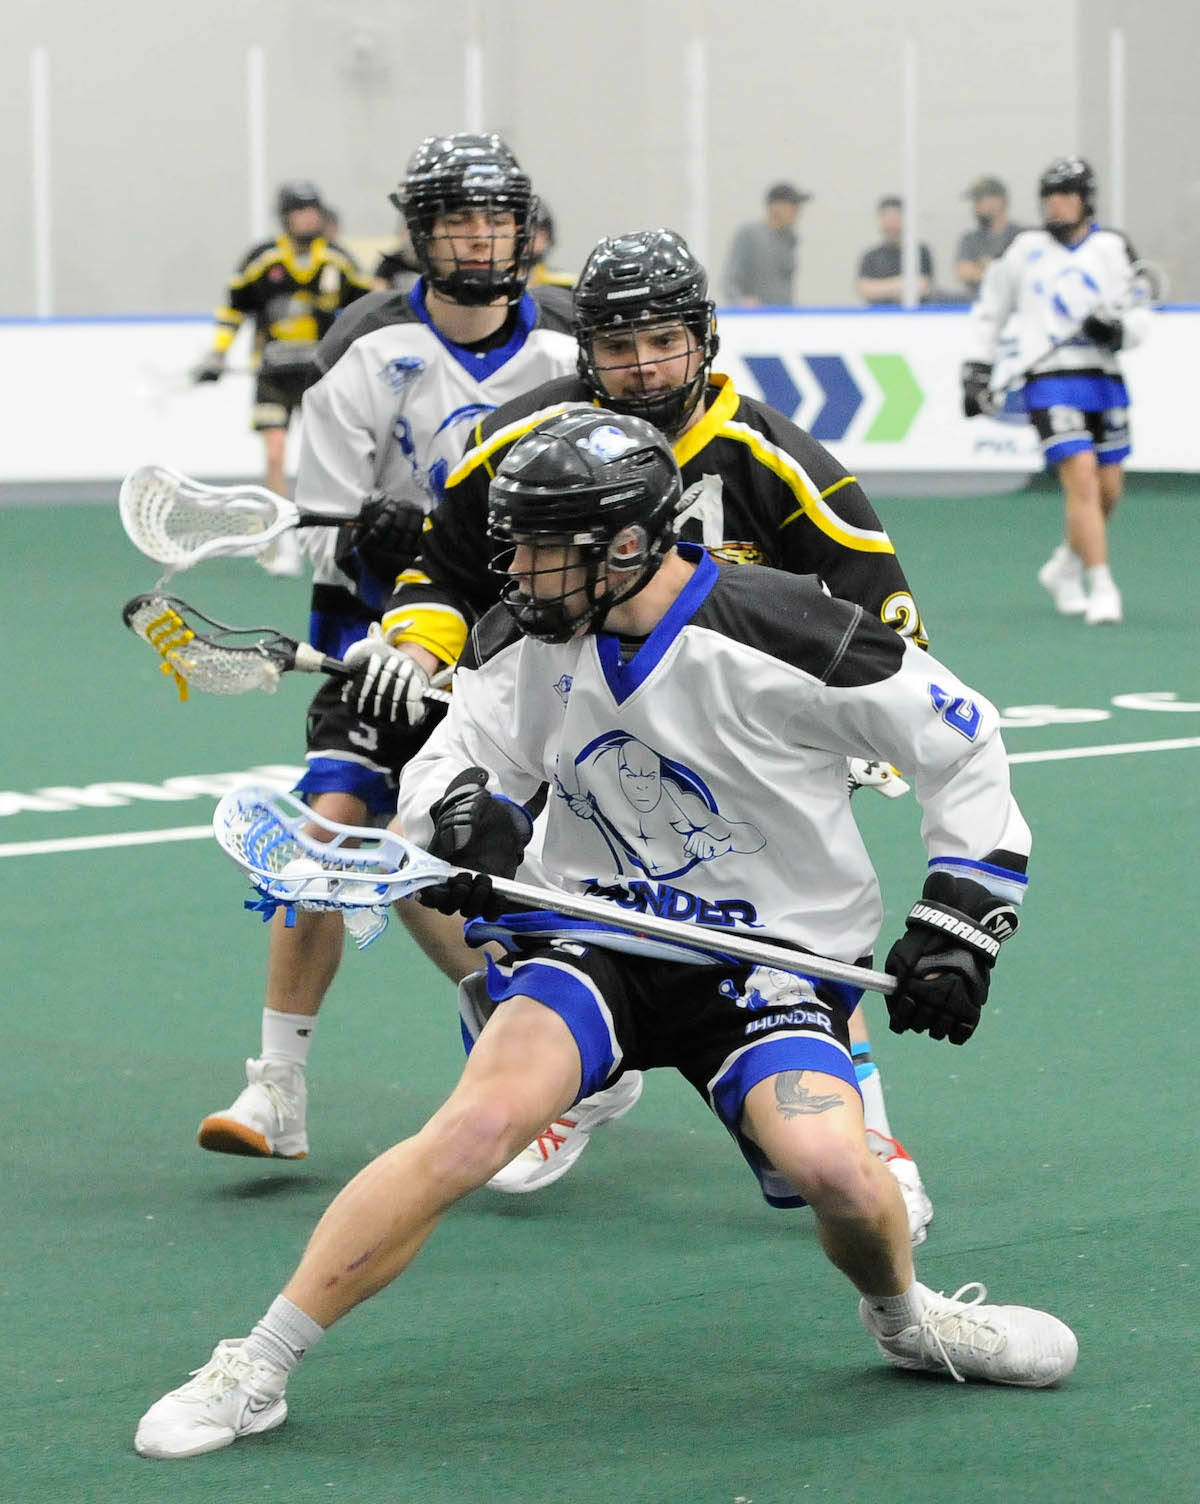 Langley Thunder opened the BC Junior Tier 1 Lacrosse League season with a pair of 11-8 losses on Sunday, April 30, in Burnaby, and Tuesday, May 2, against the Port Coquitlam Saints (seen here) at Langley Events Centre. (Gary Ahuja/Langley Events Centre)